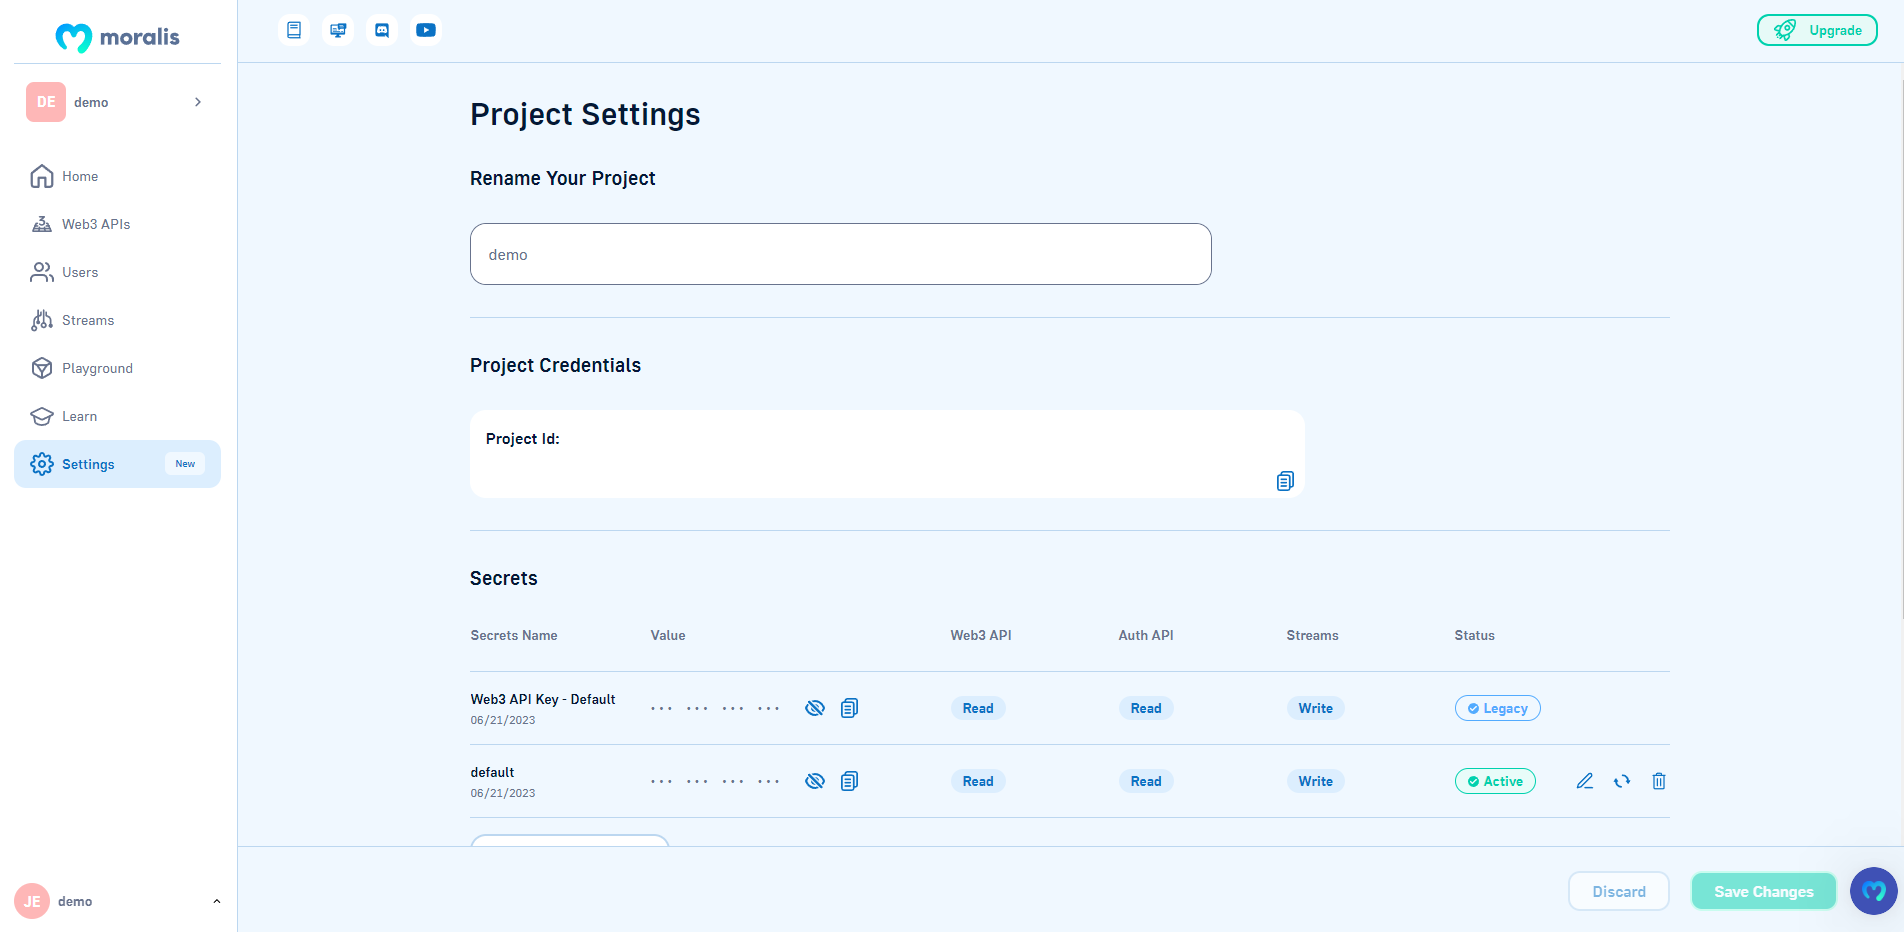 Project Settings Page